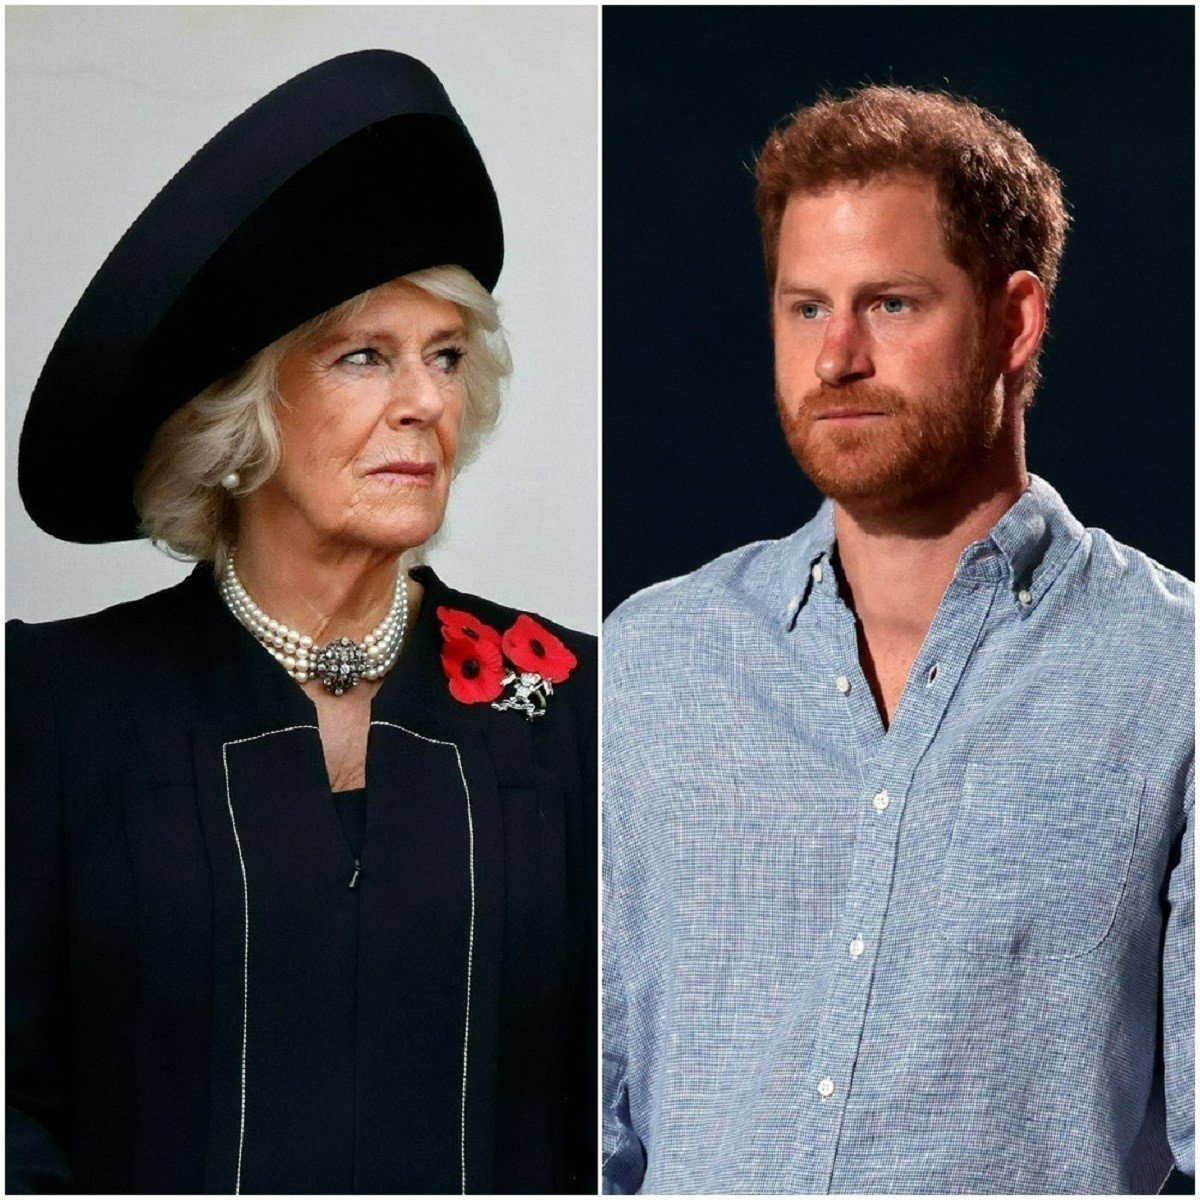 (L): Camilla Parker Bowles dressed in black at the annual Remembrance Sunday Service at The Cenotaph, (R); Prince Harry onstage at the Global Citizen VAX LIVE concert in California